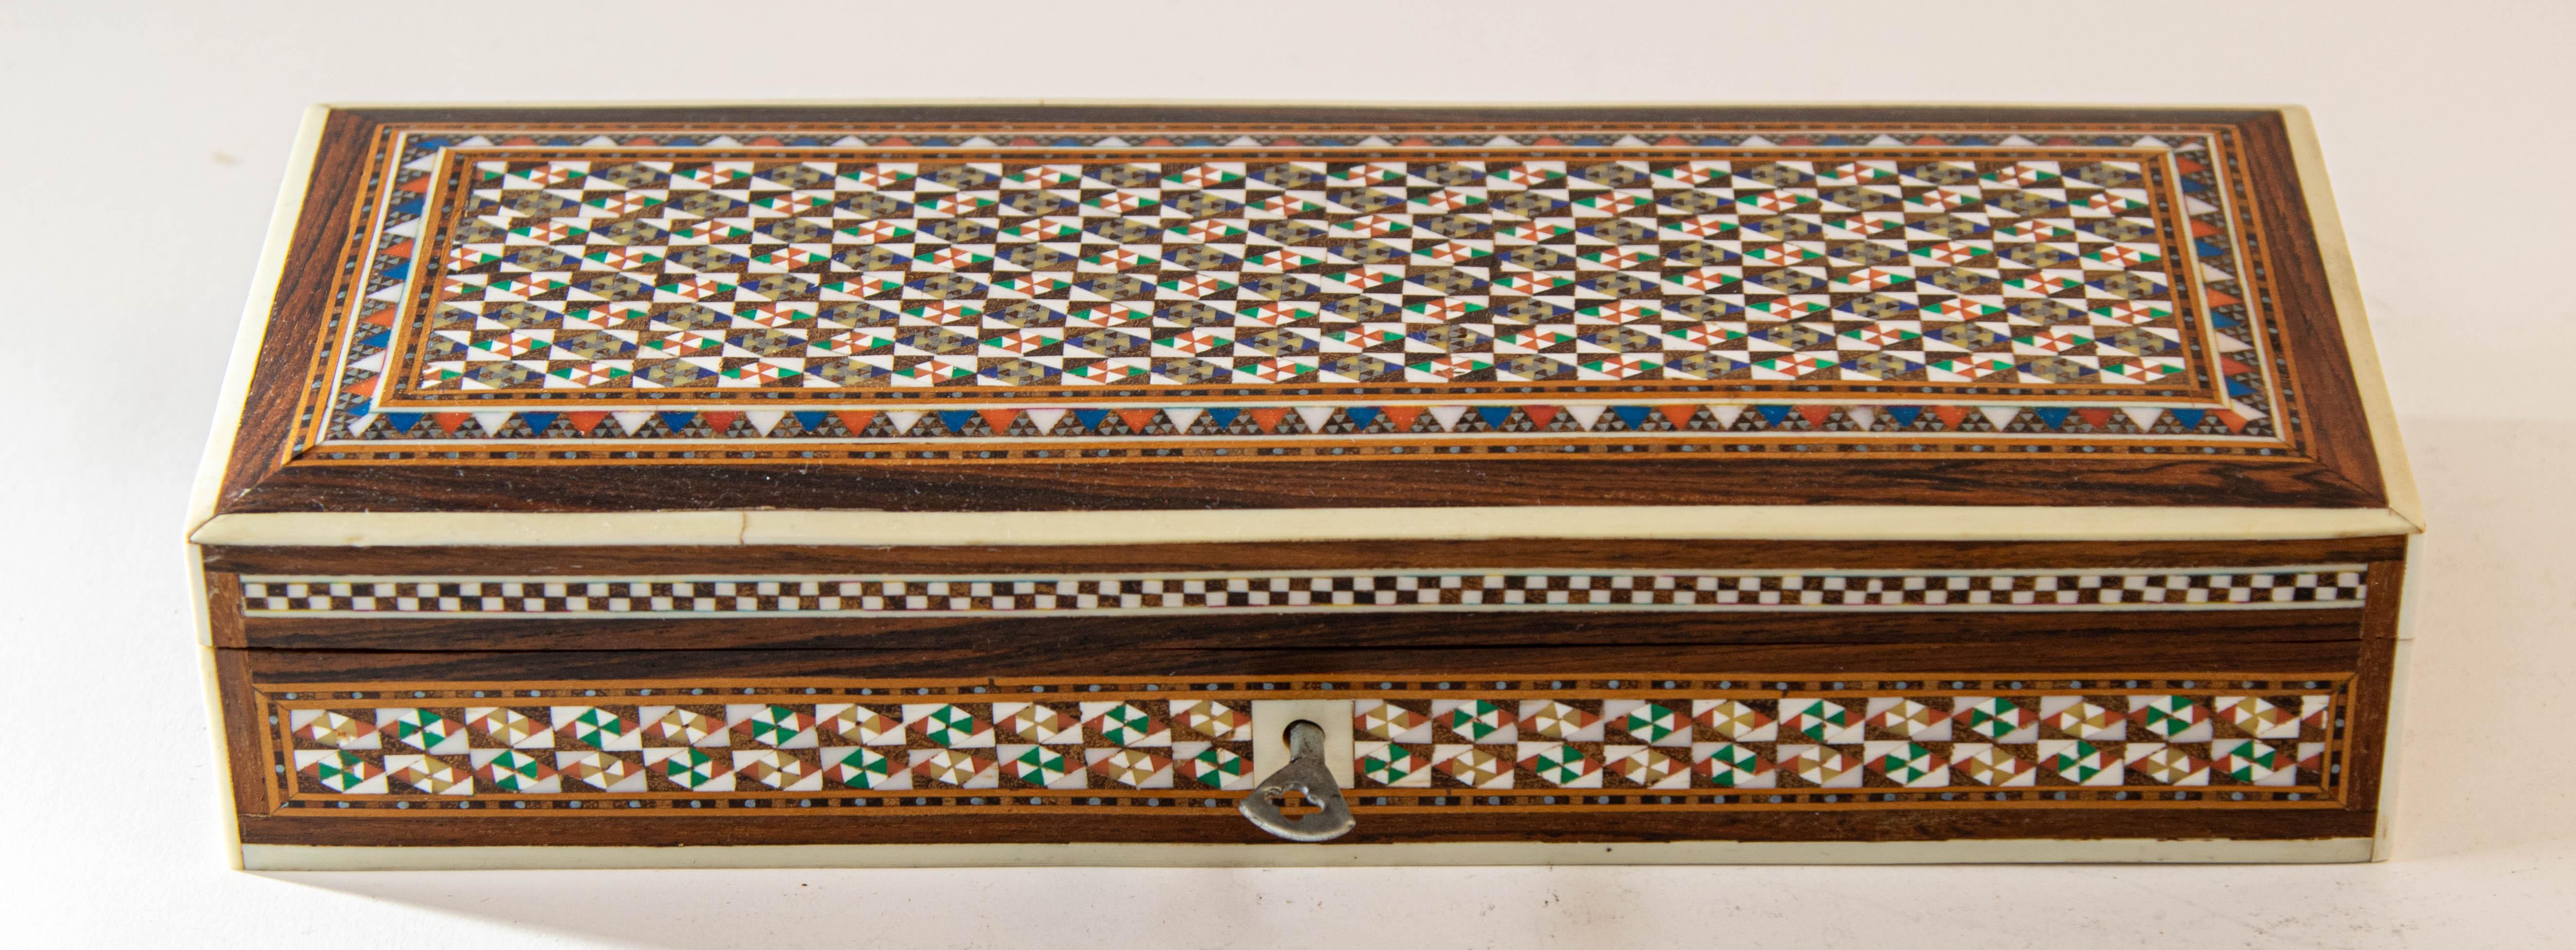 Moorish 1950s Fine Handcrafted Syrian Mother-of-Pearl Inlay Box